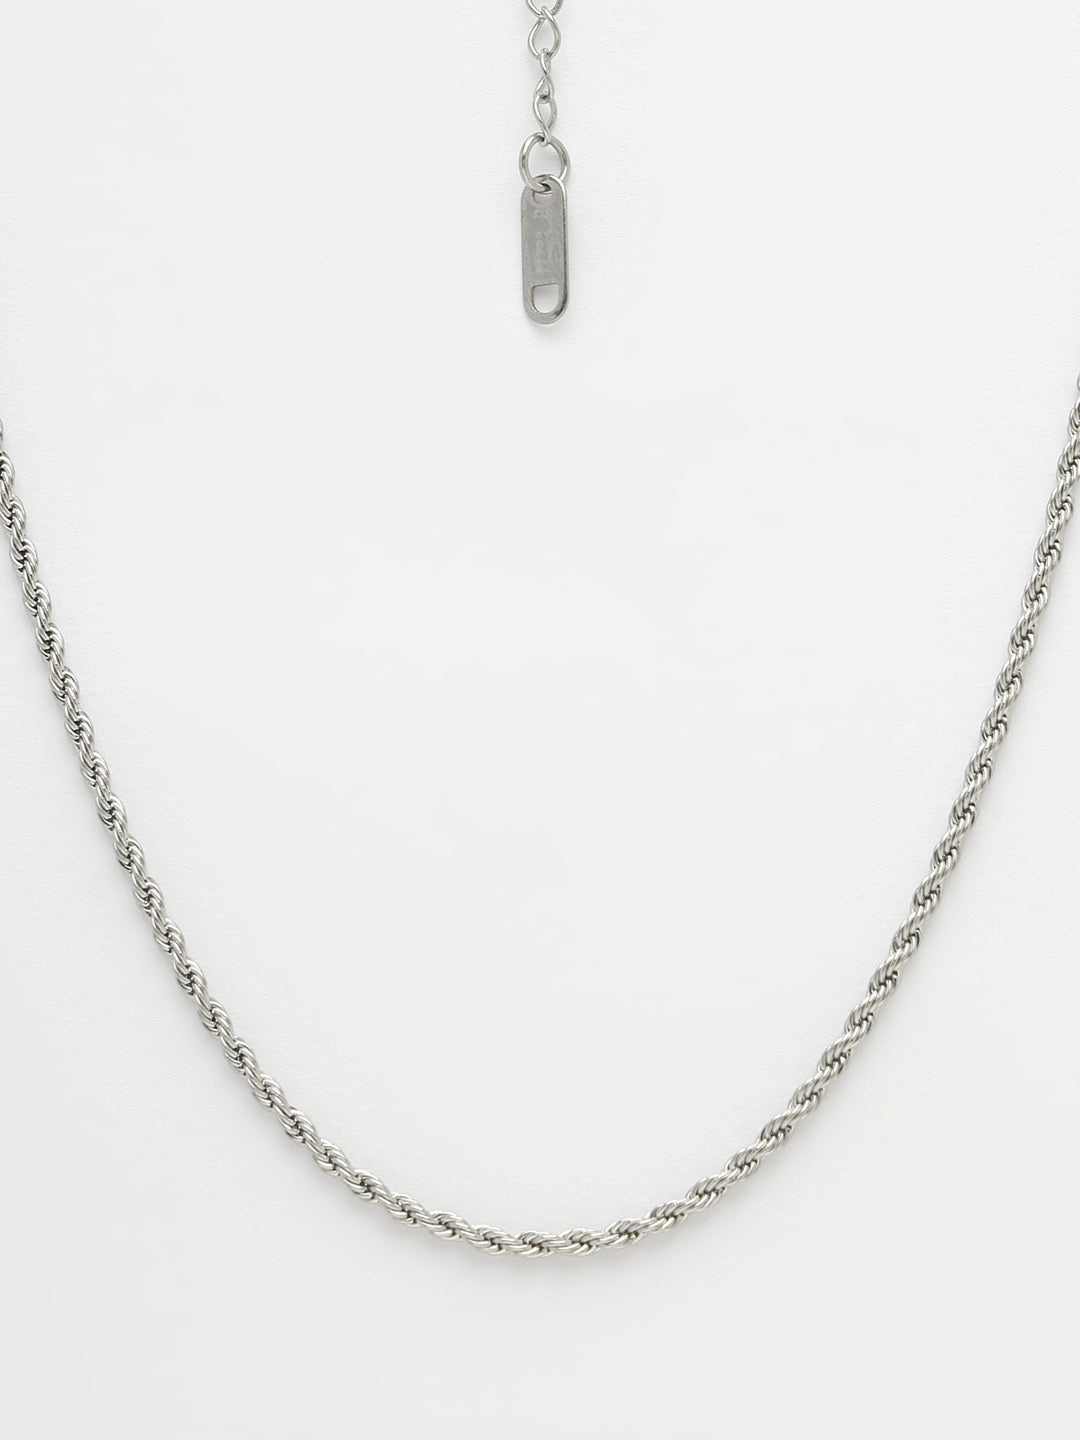 Women's Silver-Toned German Silver Oxidised Chain - Nvr